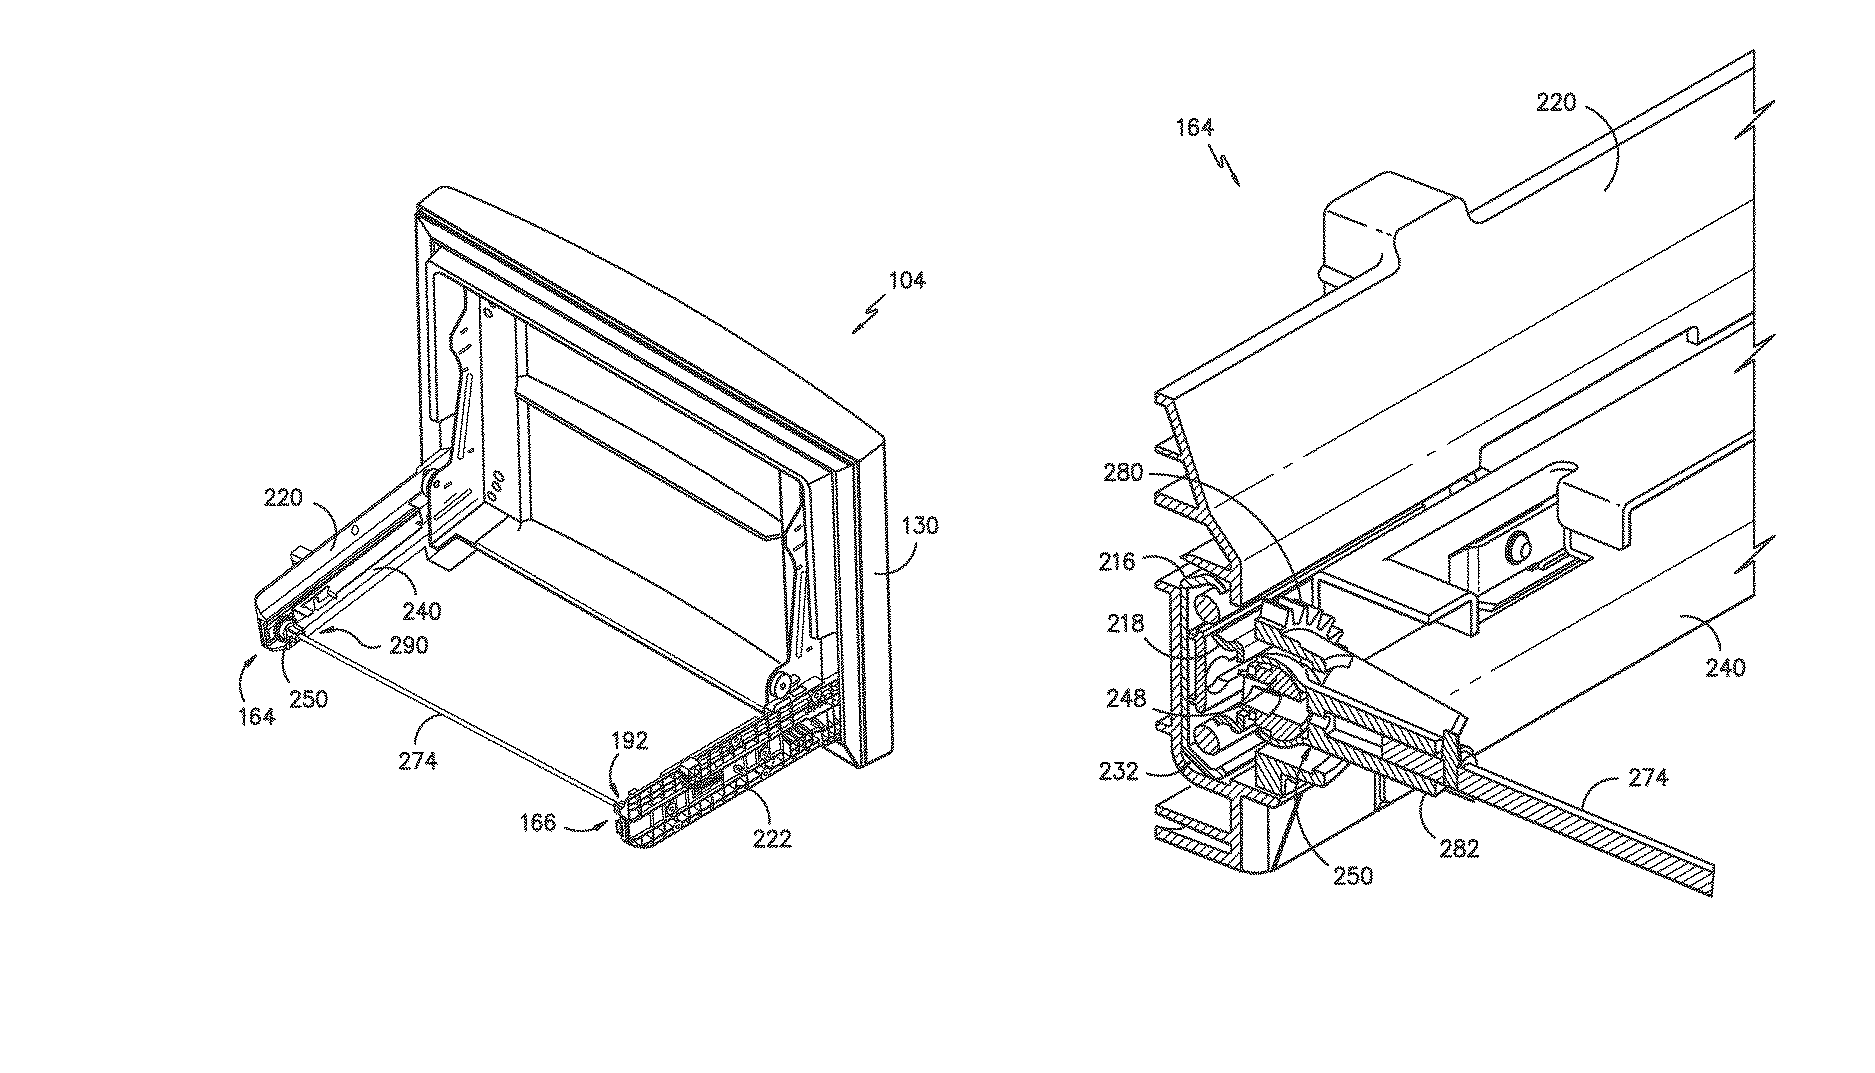 Ball joint pinion for a drawer slide assembly